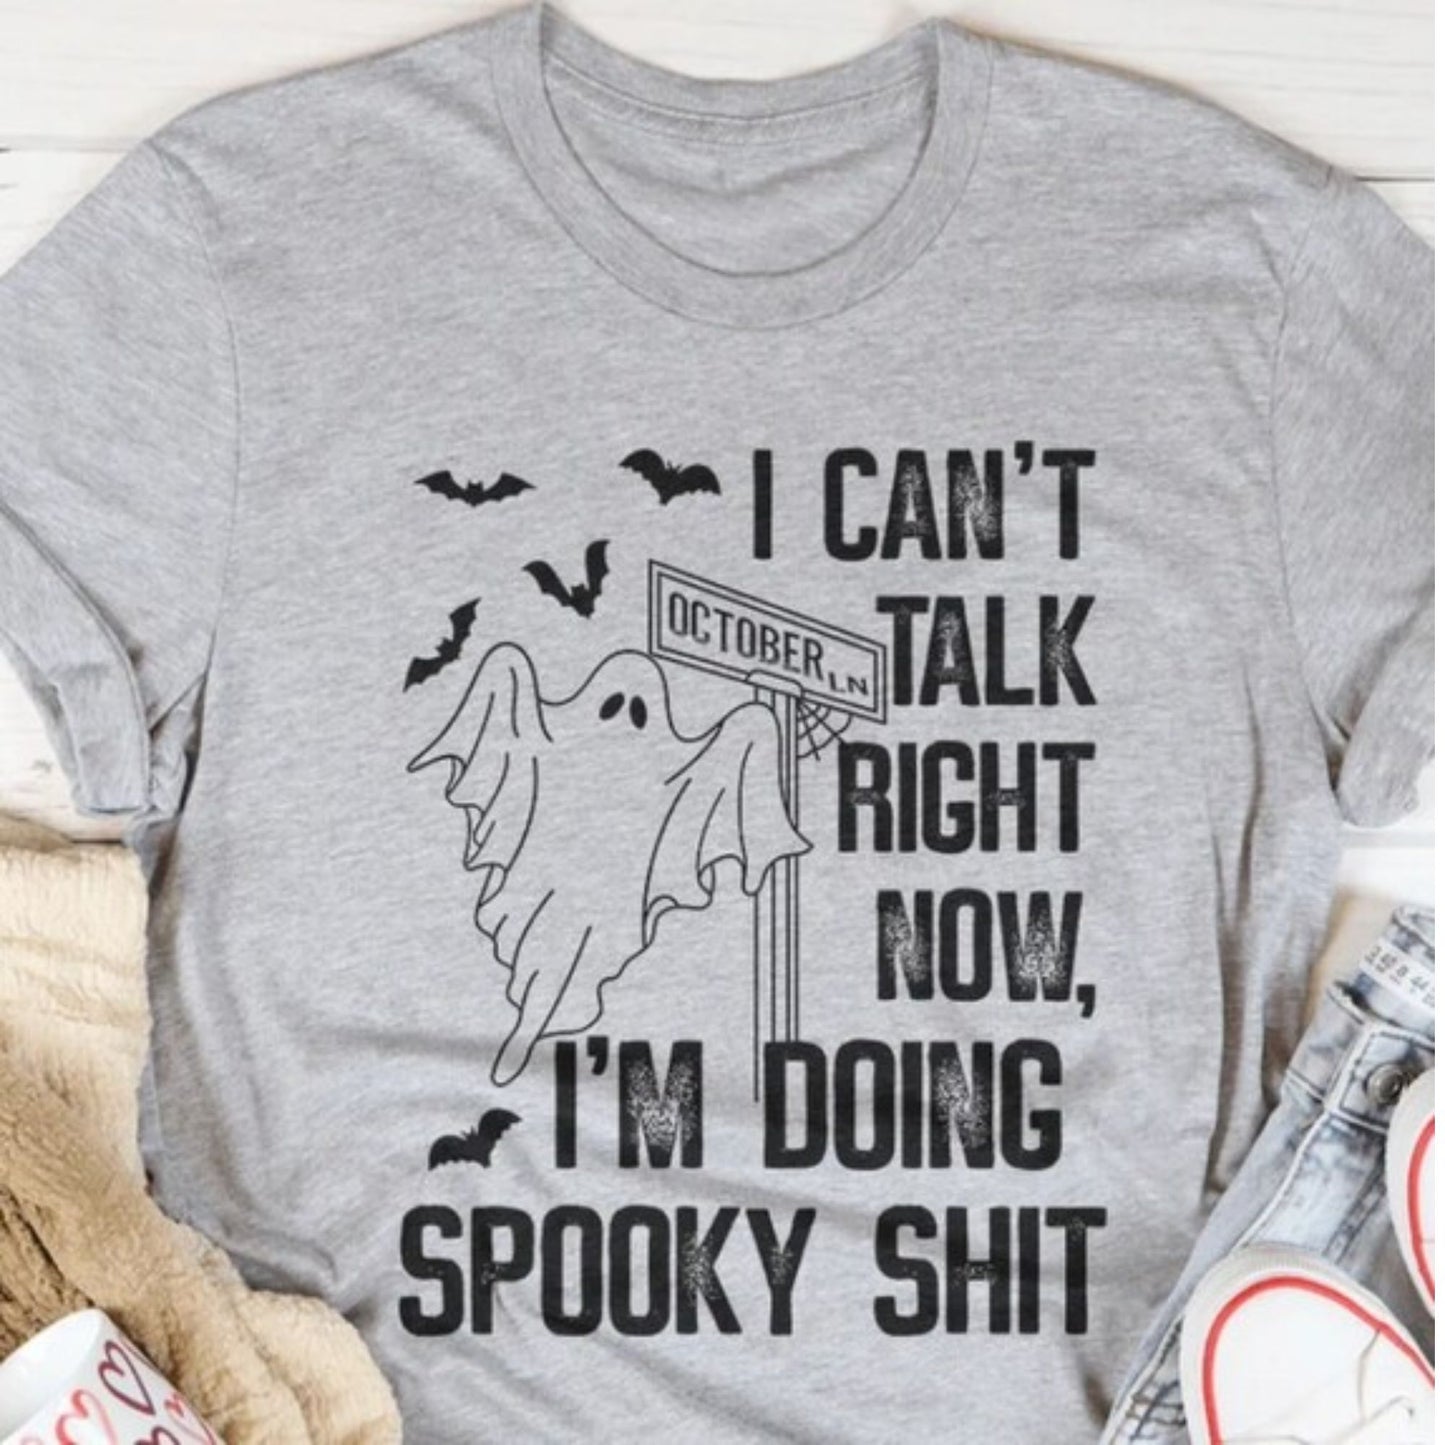 Can't Talk Right Now Doing Spooky Shit Print For Apparel